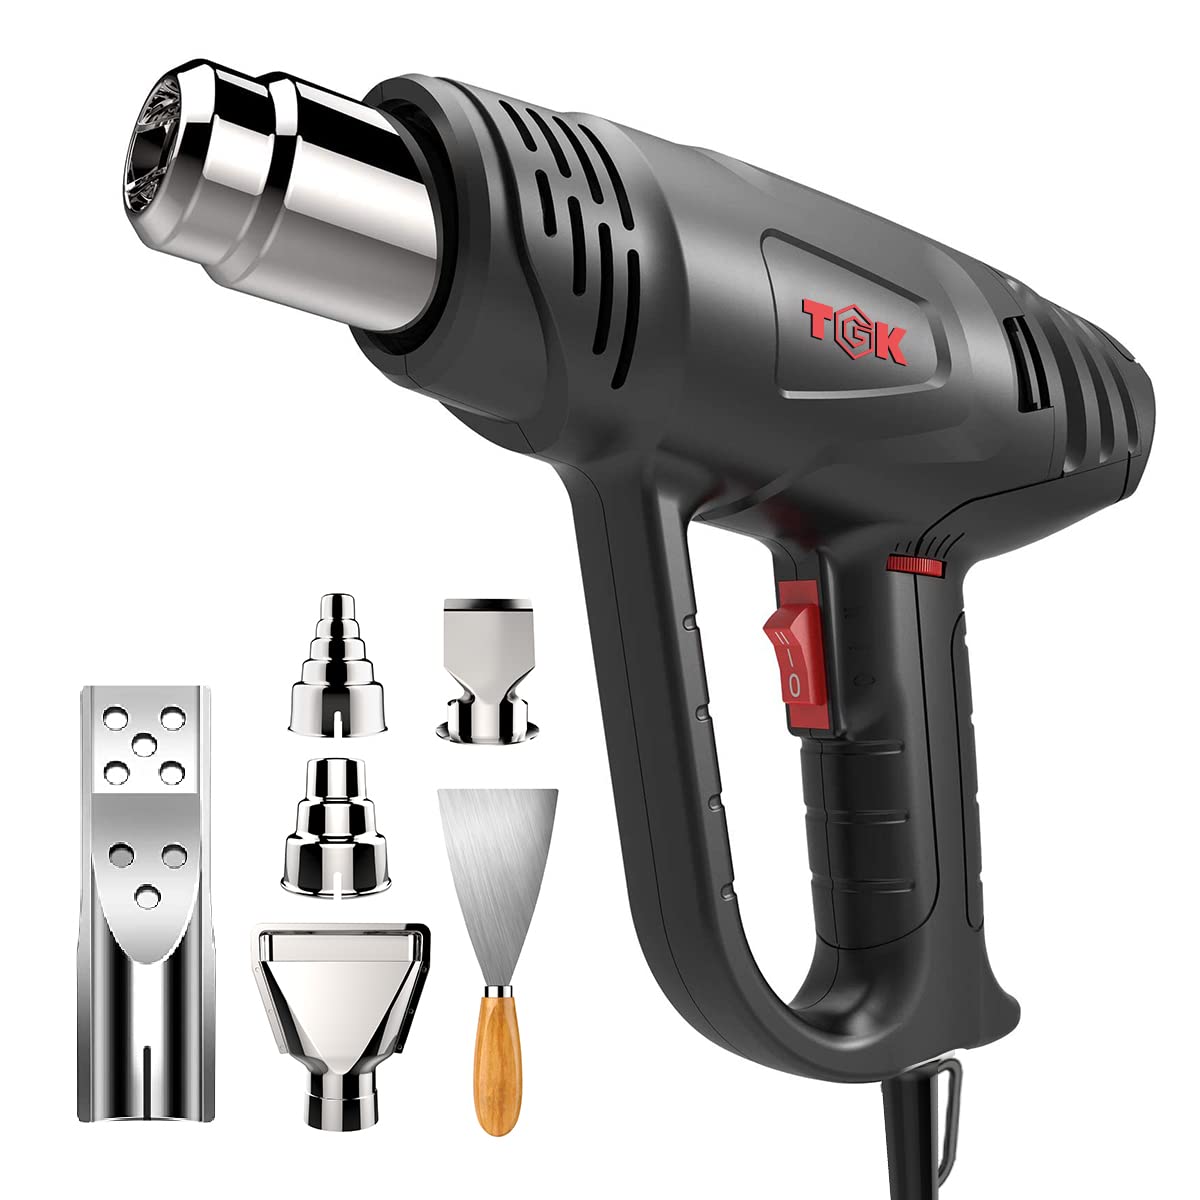 Factory making Heavy Duty Hot Air Blower - Heat Gun, TGK 1800W Heavy Duty Hot Air Gun Kit 122℉~1202℉ Dual Temperature Settings with 6 Nozzle Attachments Overload Protection for Crafts, Shrink Wrap...